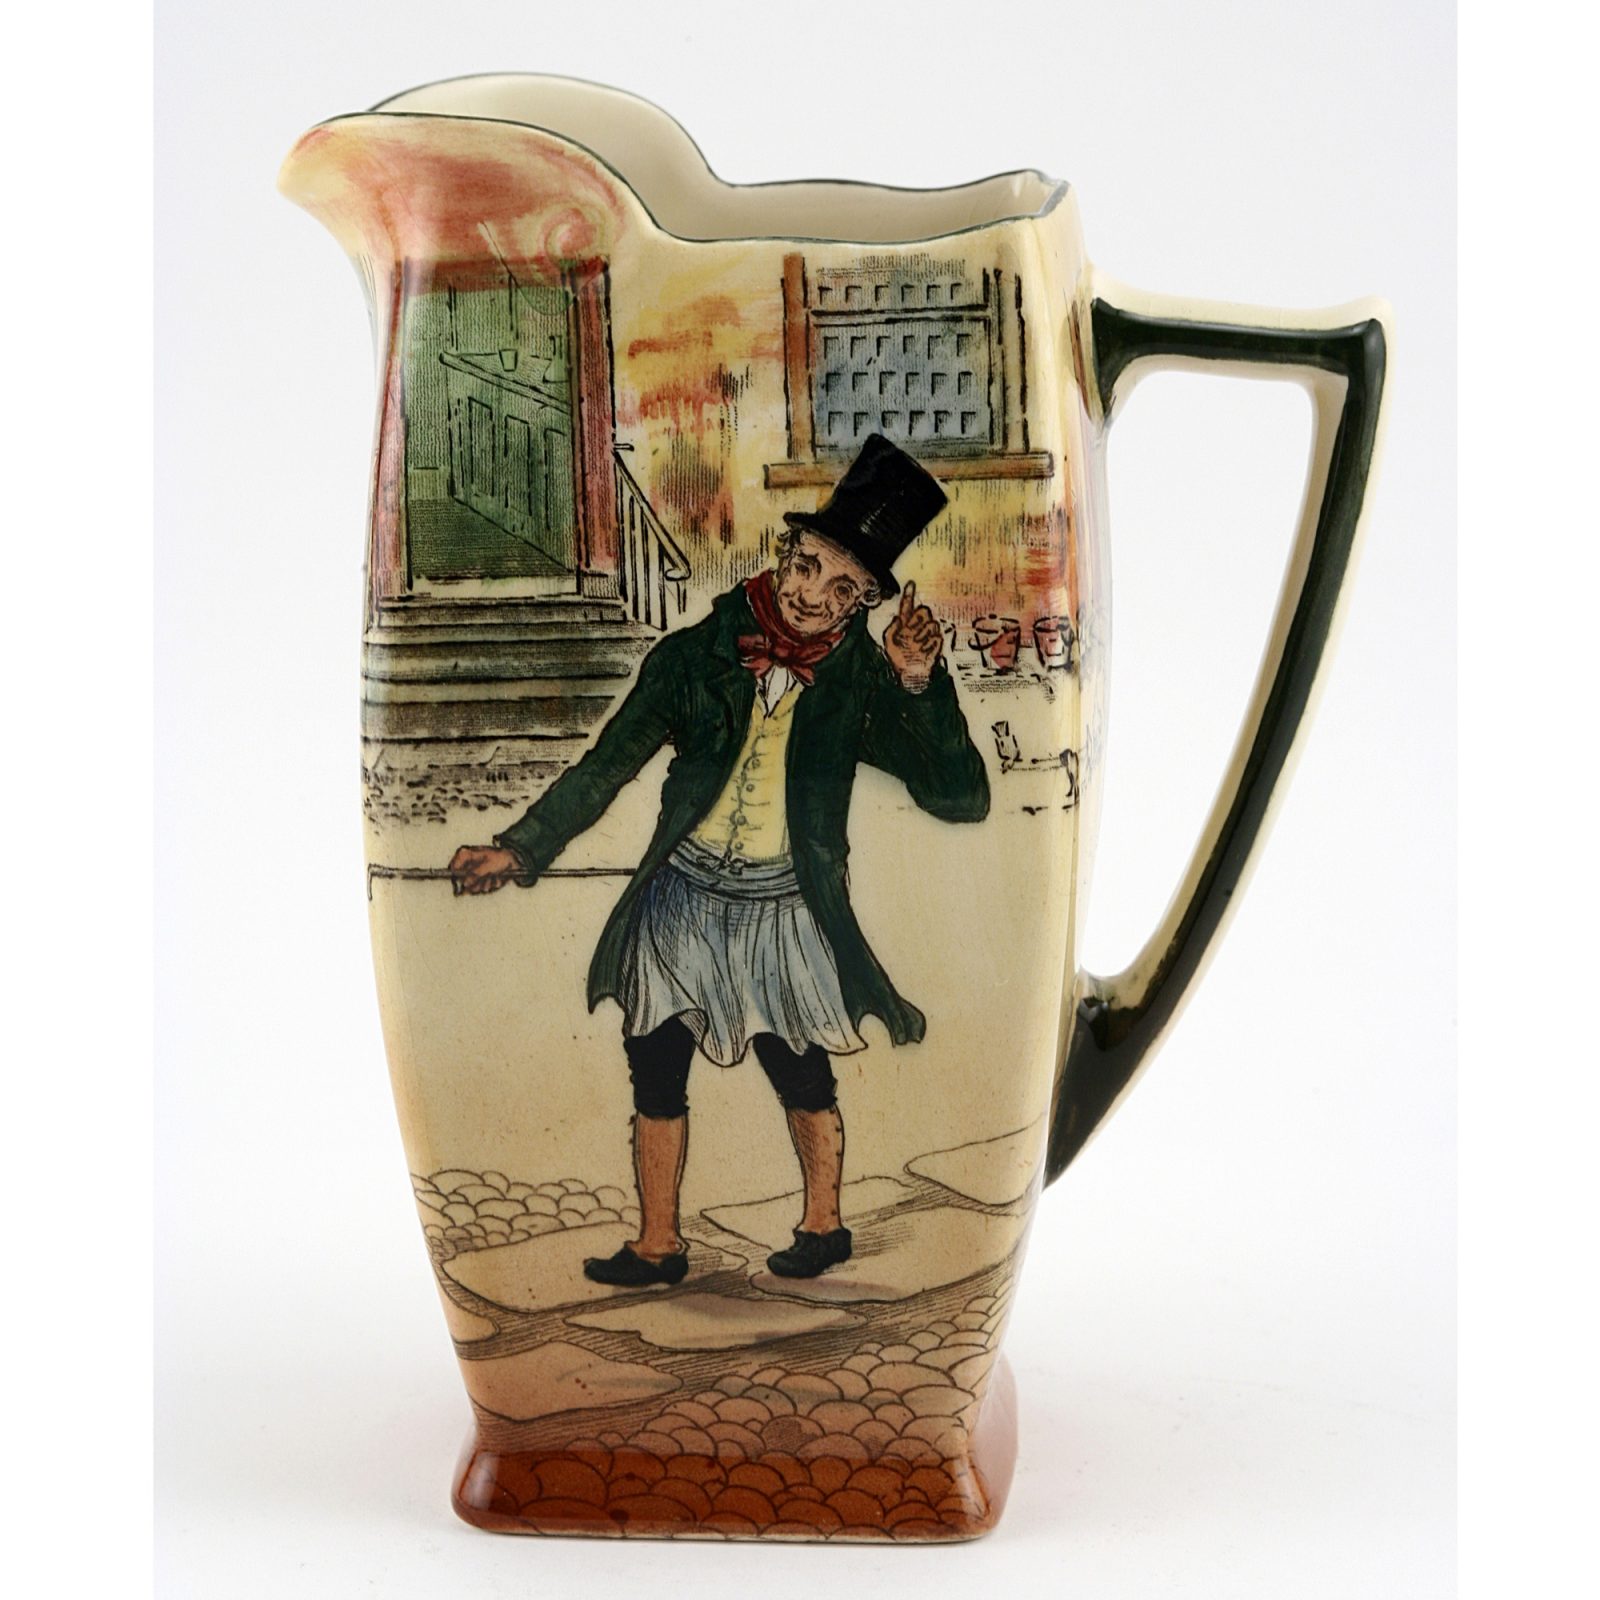 Dickens Trotty Veck Square Pitcher - Royal Doulton Seriesware